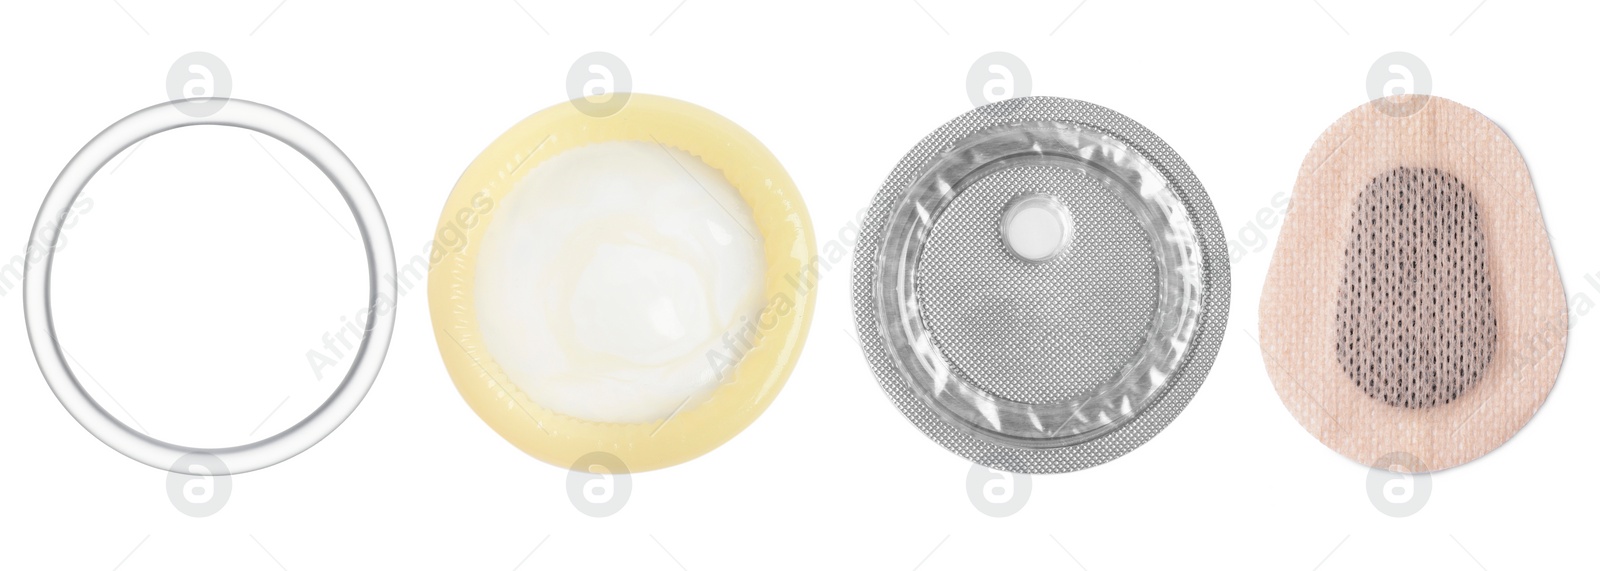 Image of Contraceptive patch, vaginal ring, condom and emergency pill isolated on white. Different birth control methods